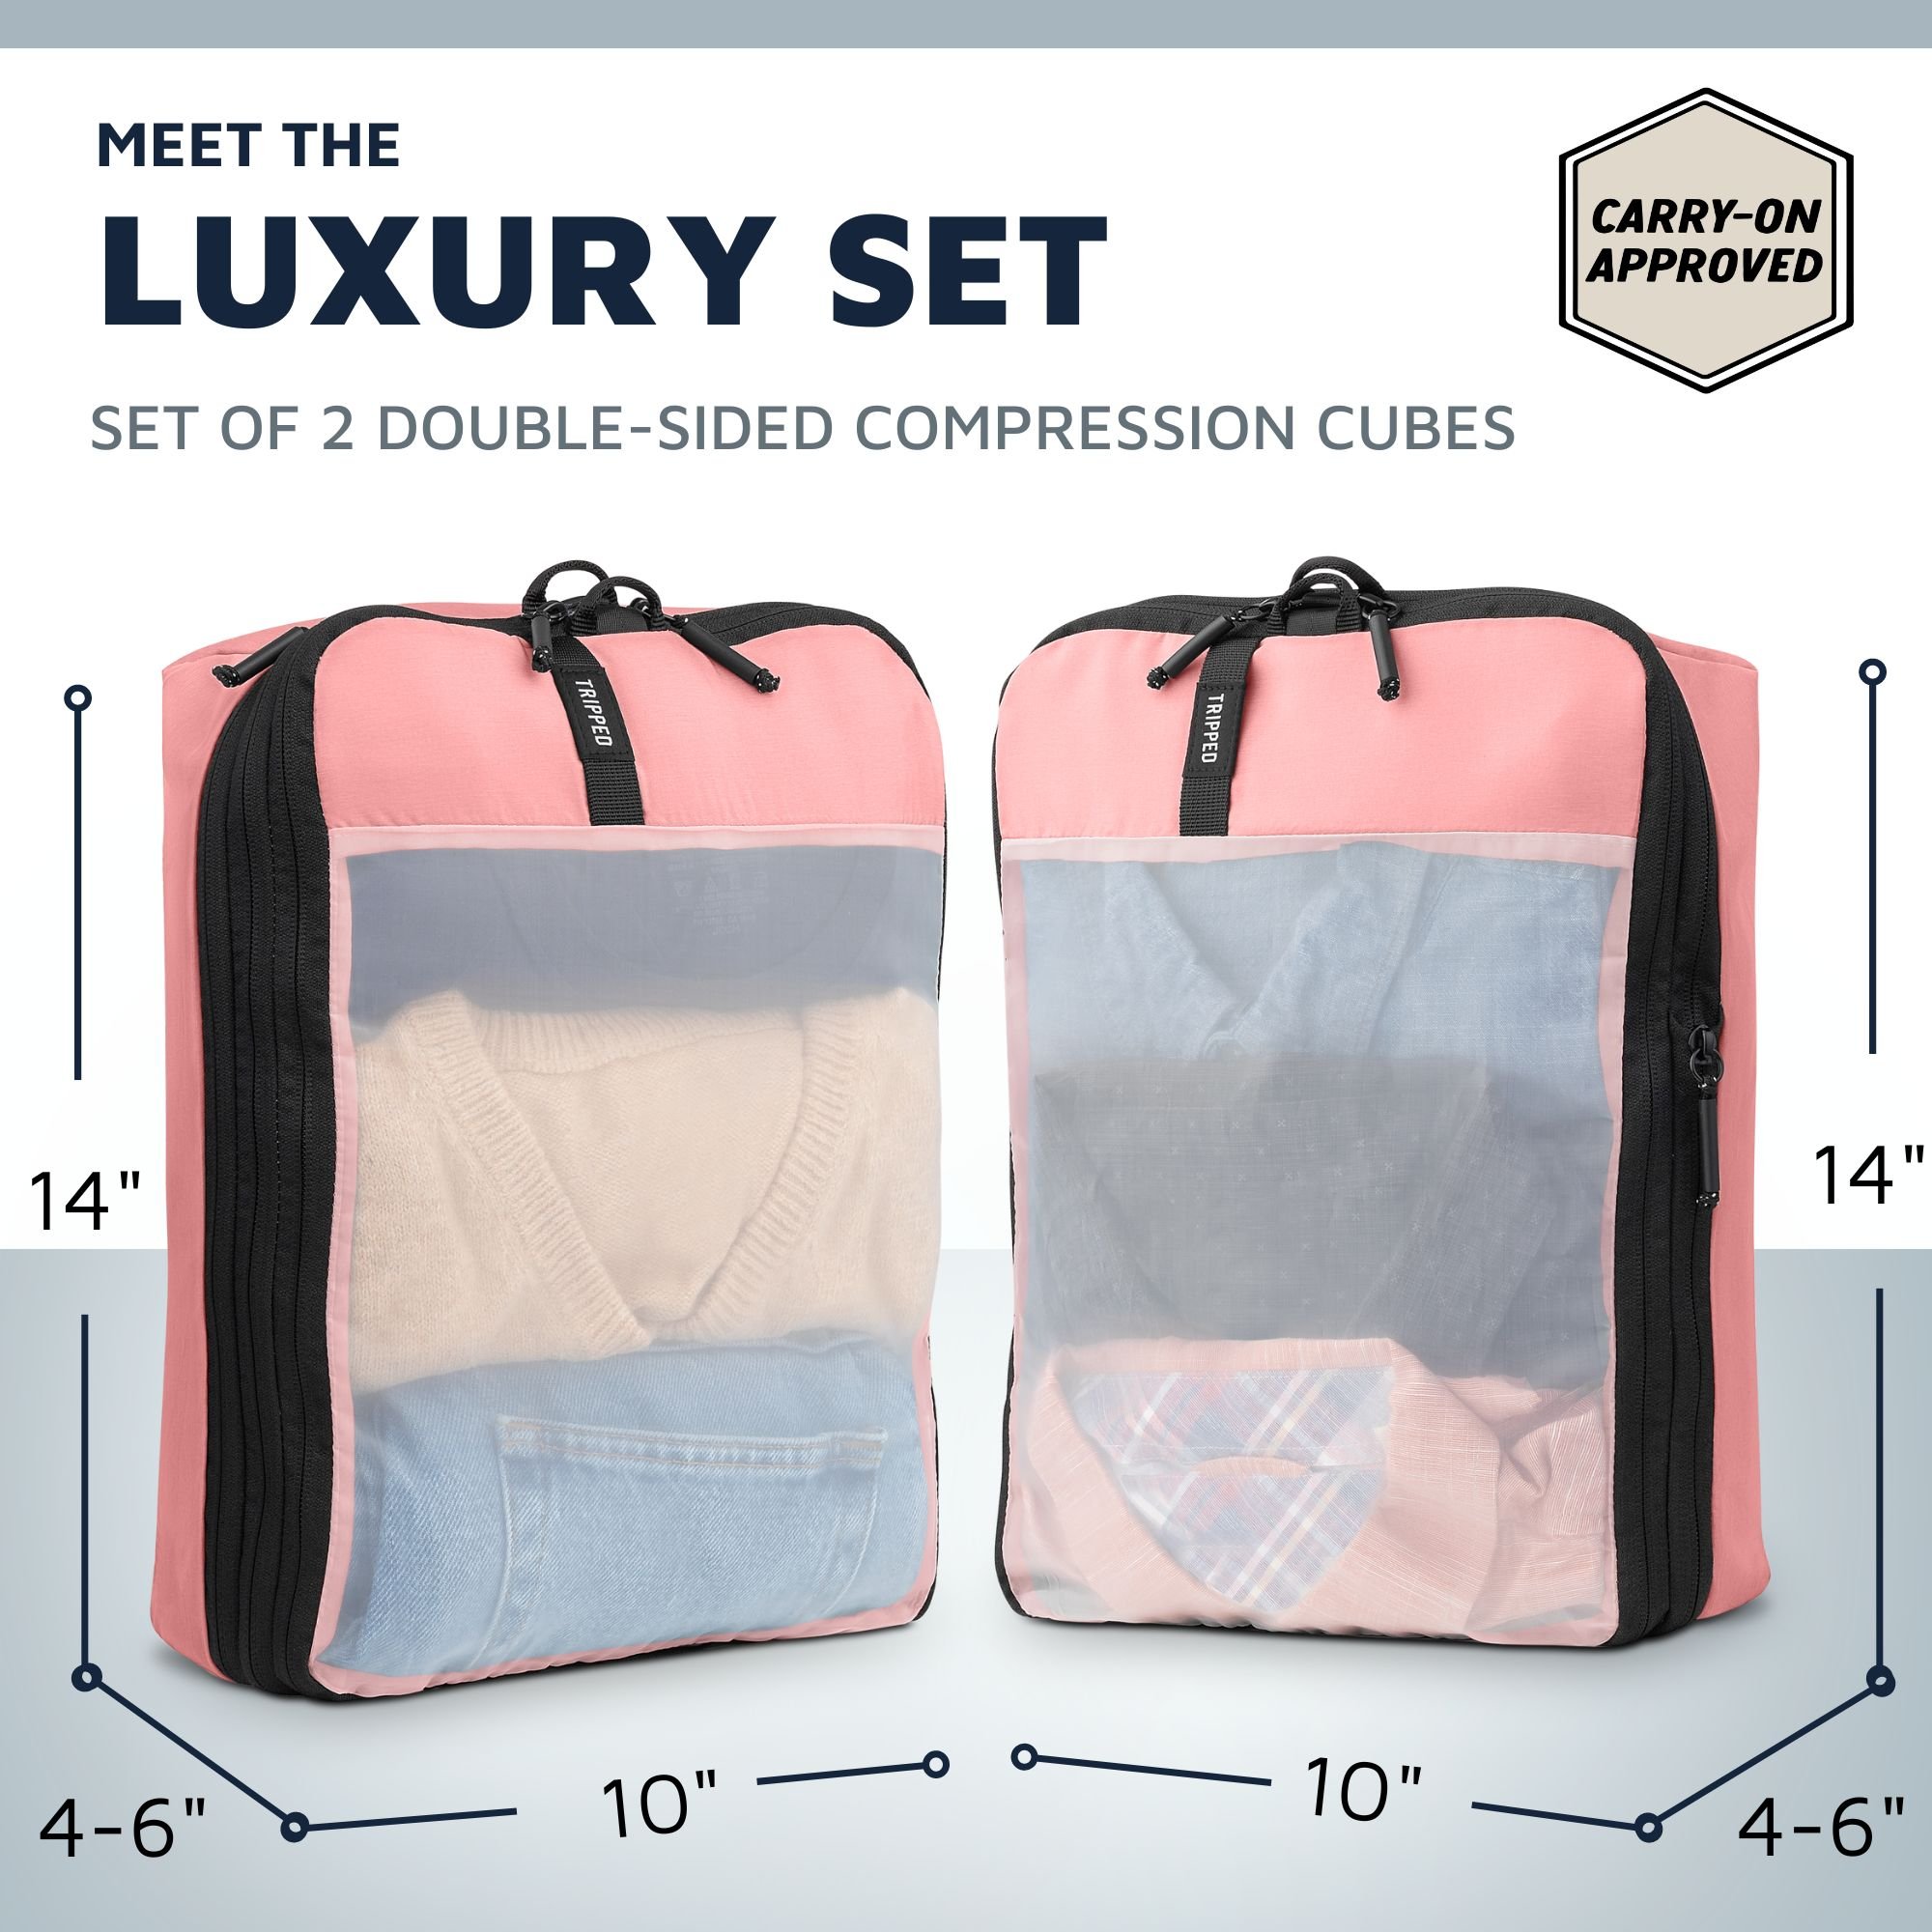 business class packing cubes luxury compression cube pink set.jpg